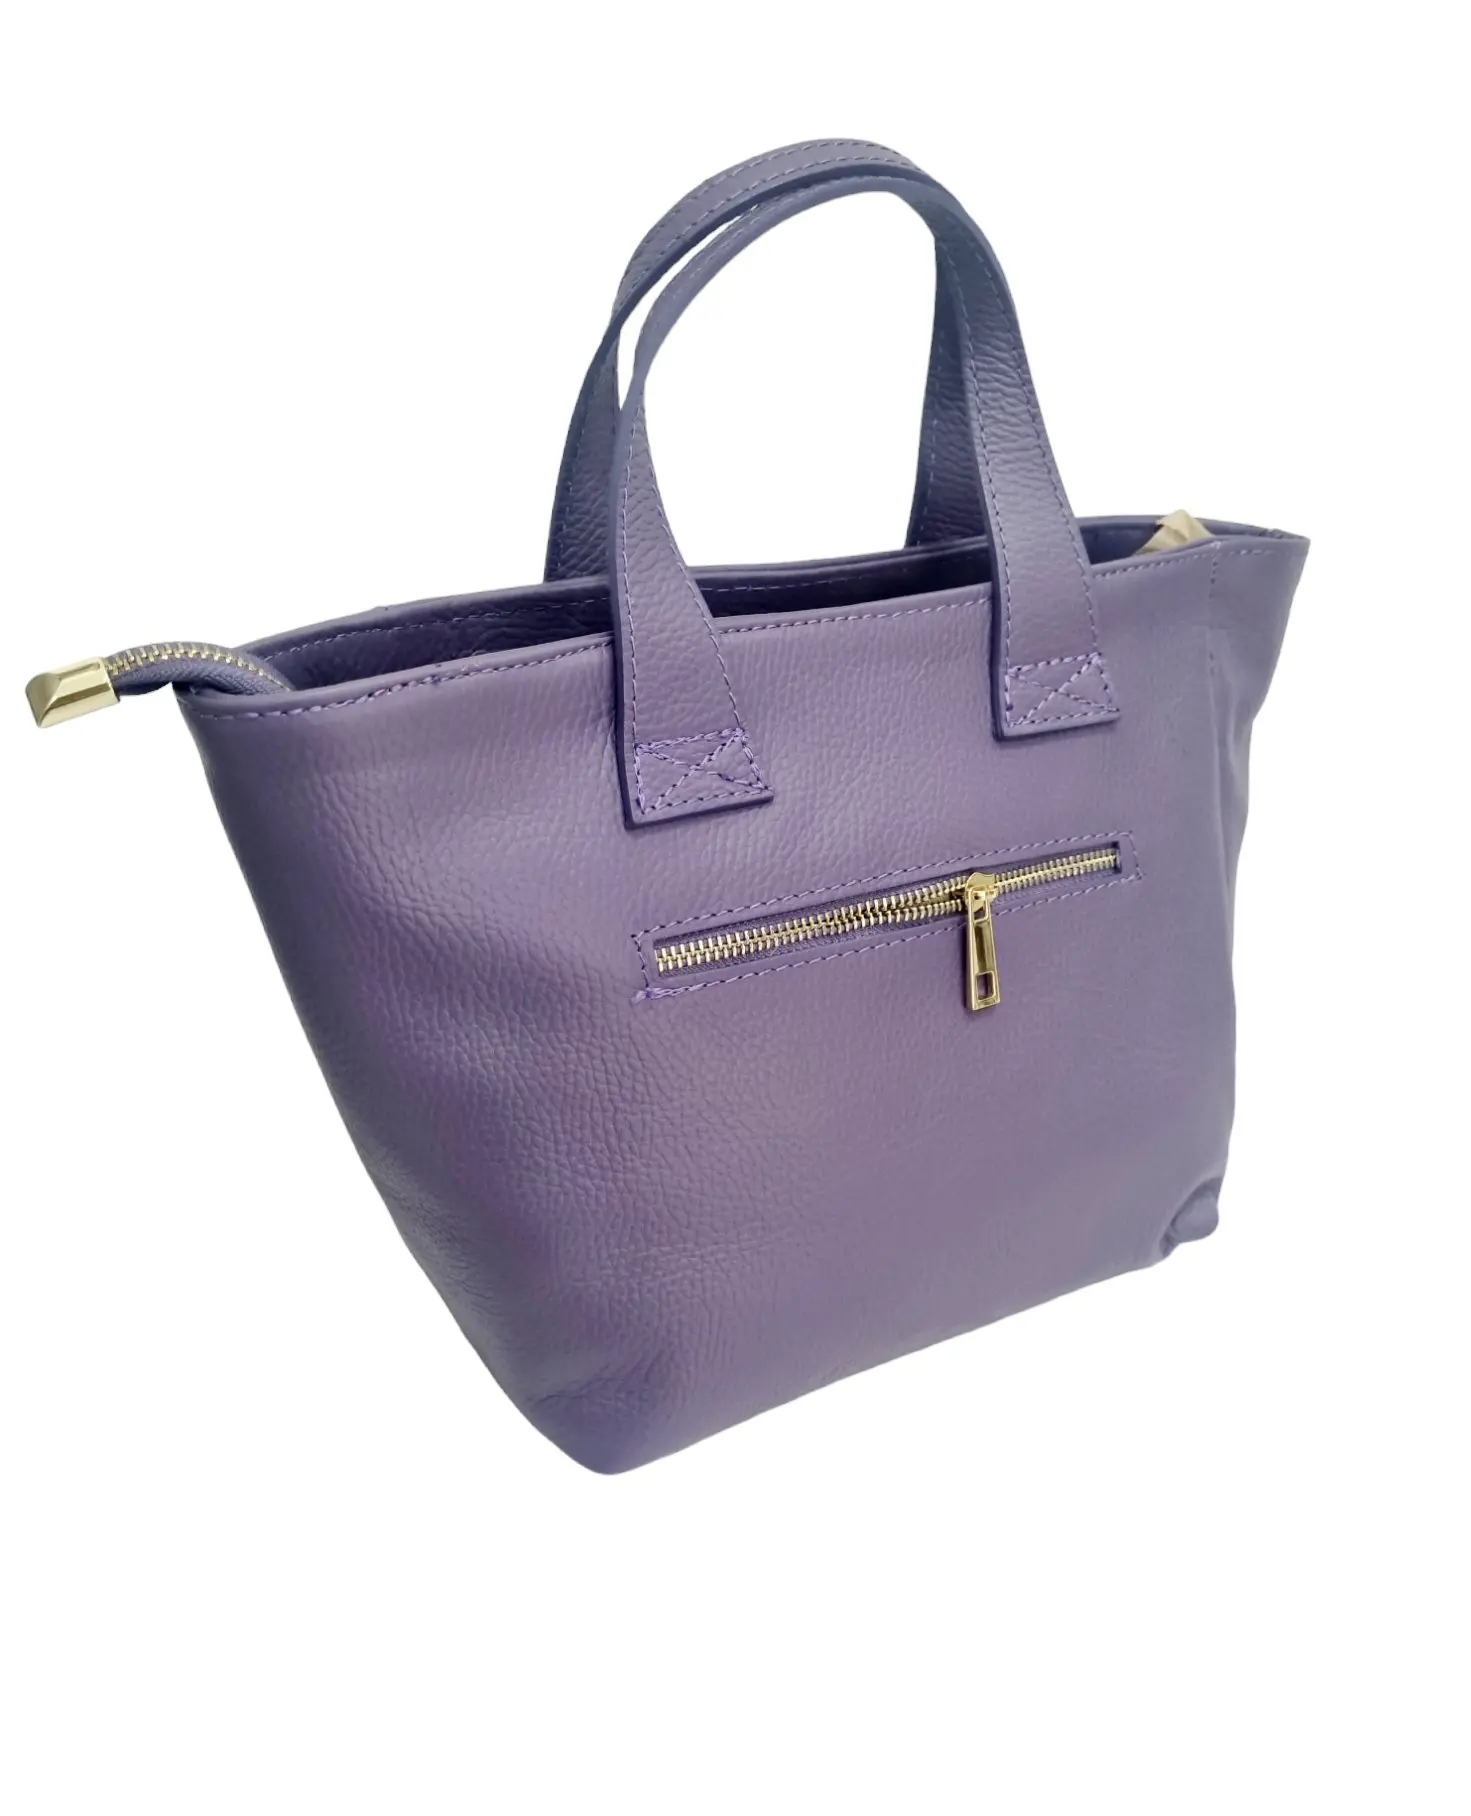 Real leather bag, made in Italy, purple, with external zip pocket. internal zip closure single lined pocket with side pockets. Equipped with shoulder strap. Measures H24 B13 L25